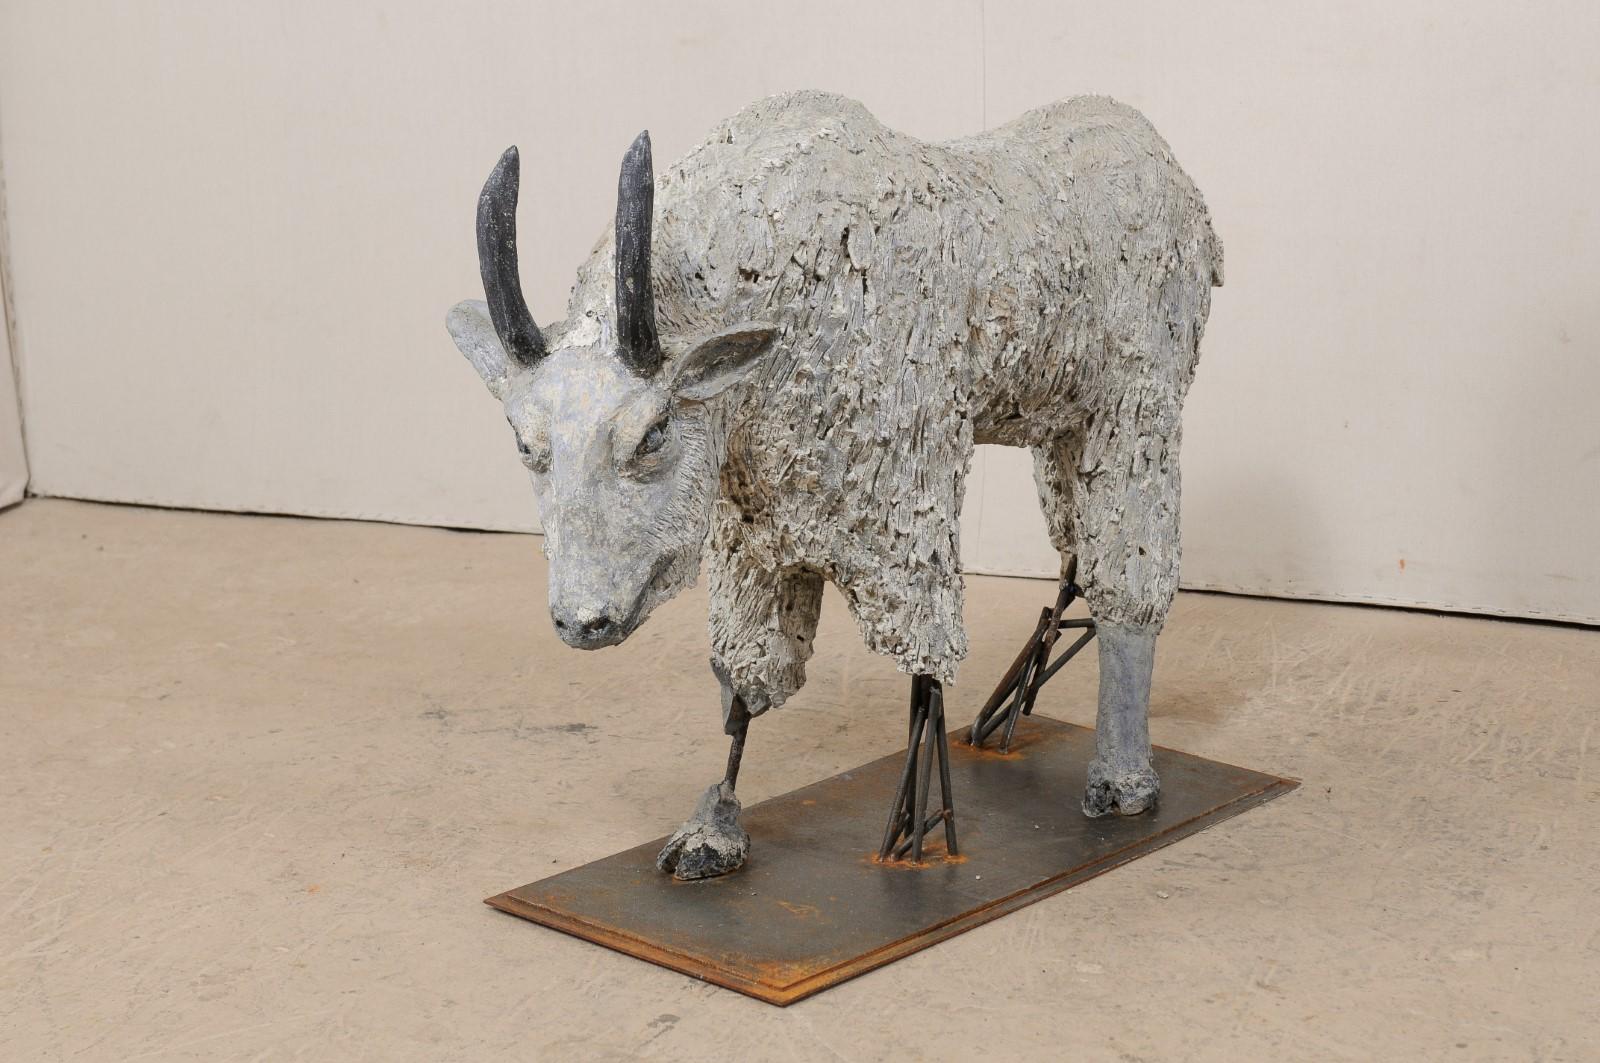 An impressive French mountain goat sculpture from the early to mid 20th century. This French folk-art concrete sculpture features a mountain goat carved with a heavily textured coat, lowered grazing head stance, with horned head and hump at